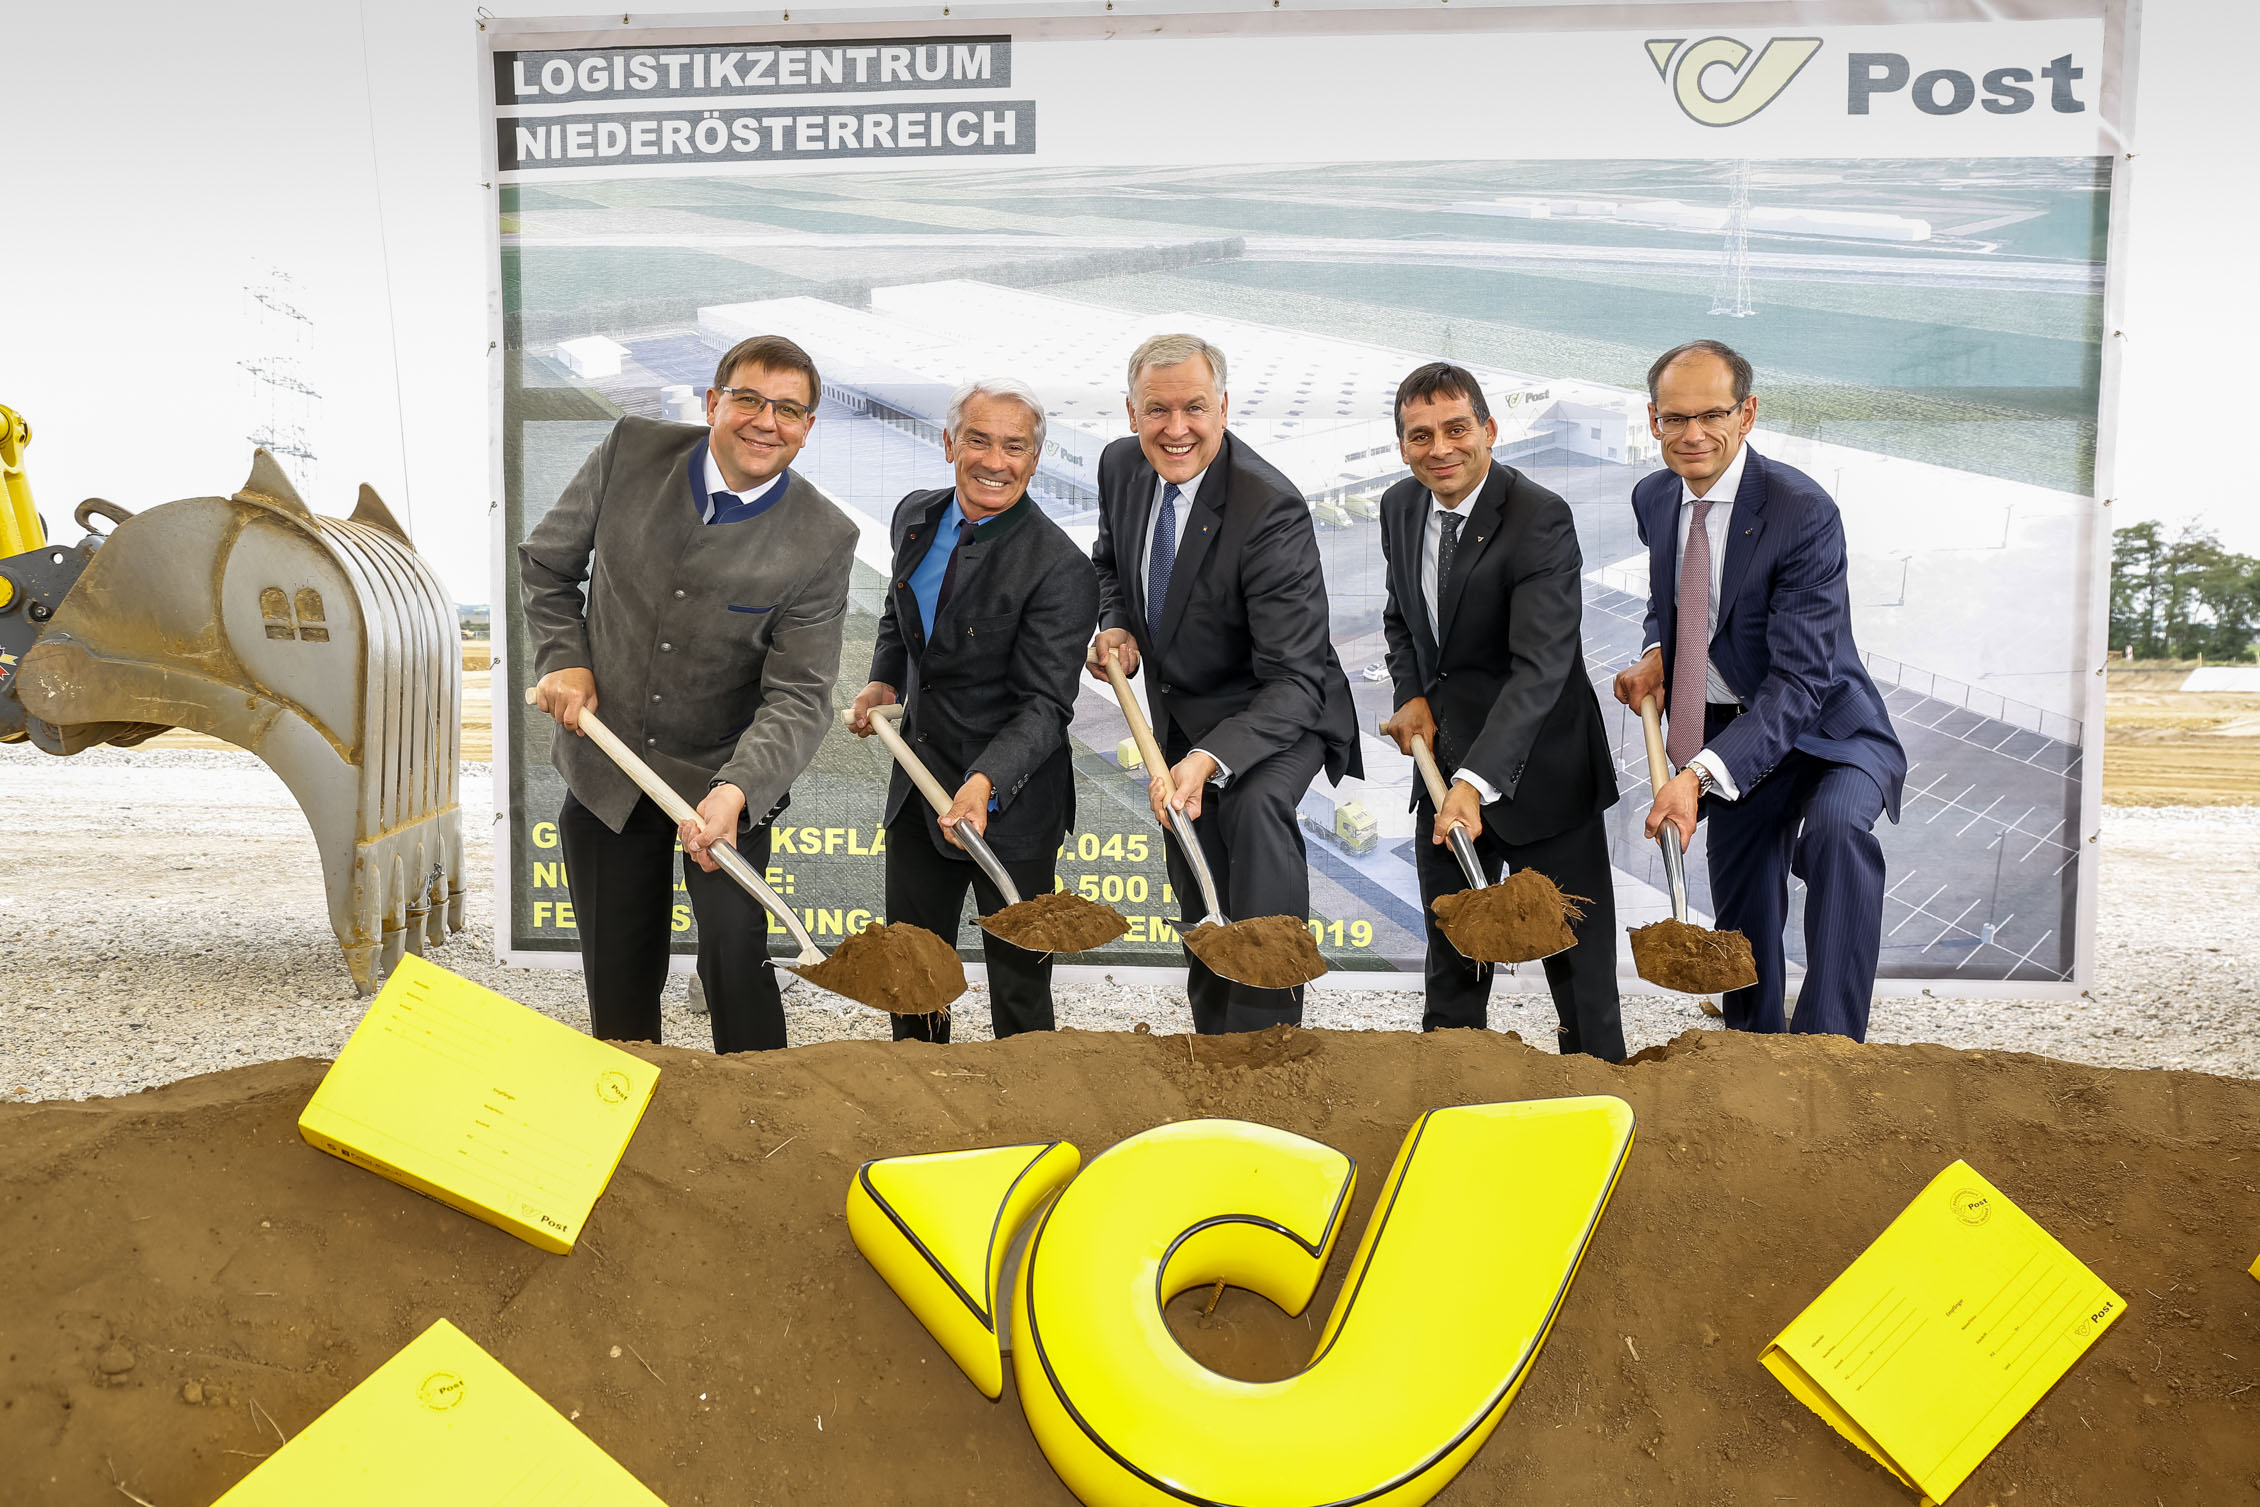 Ground-breaking ceremony for Post’s sorting plant in Lower Austria